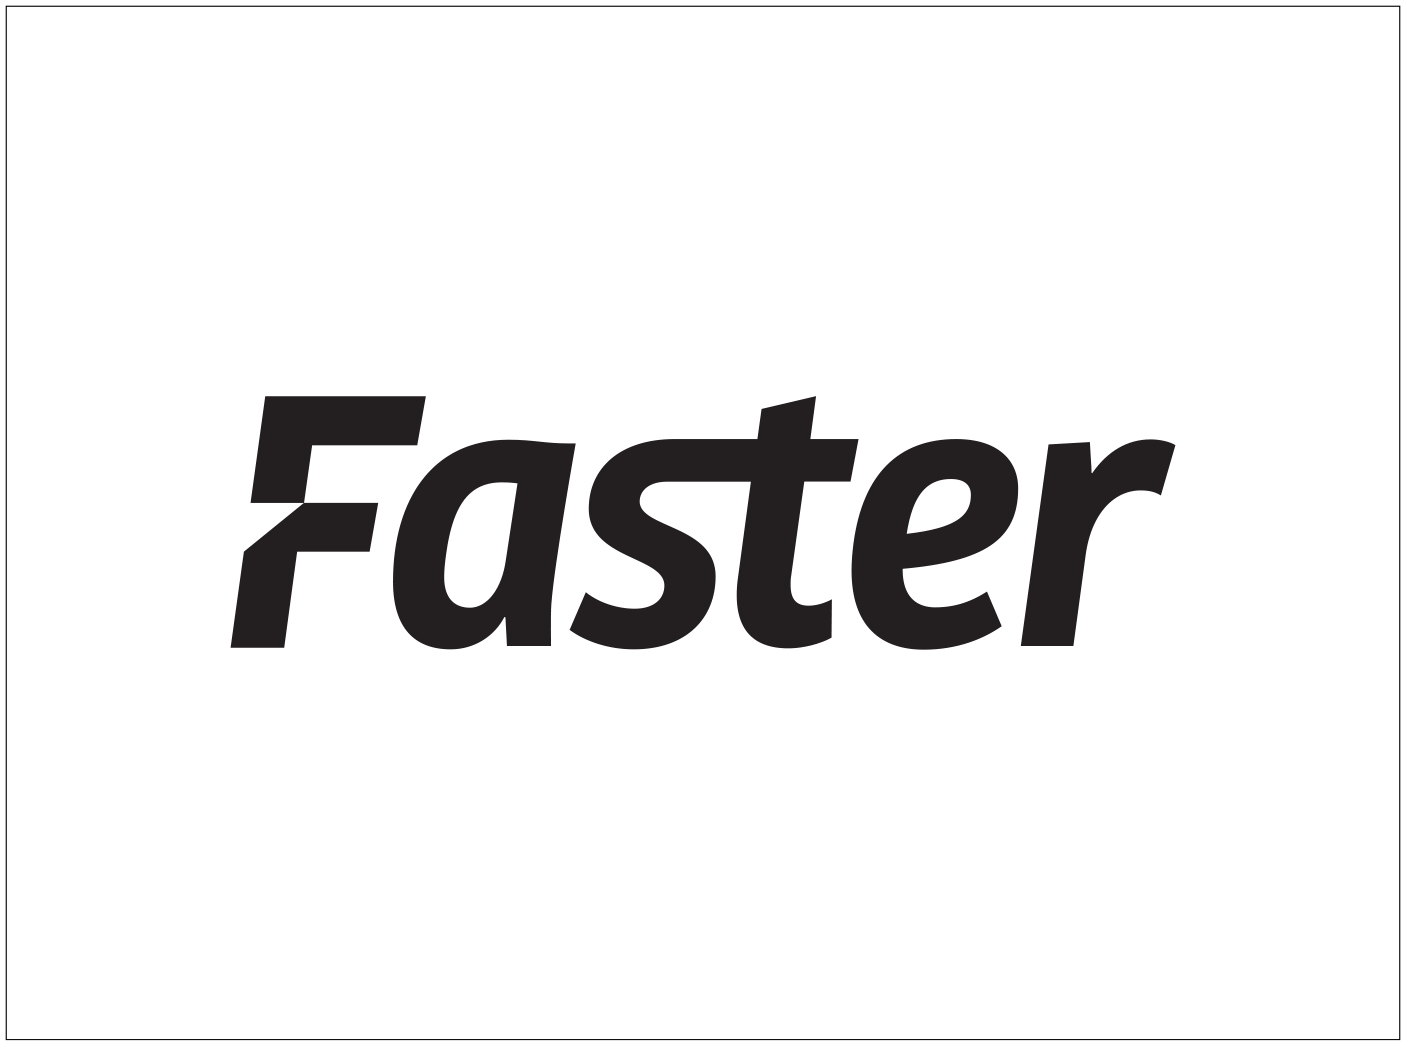 Faster Logo - Faster | The global reference in quick-release hydraulic couplings ...